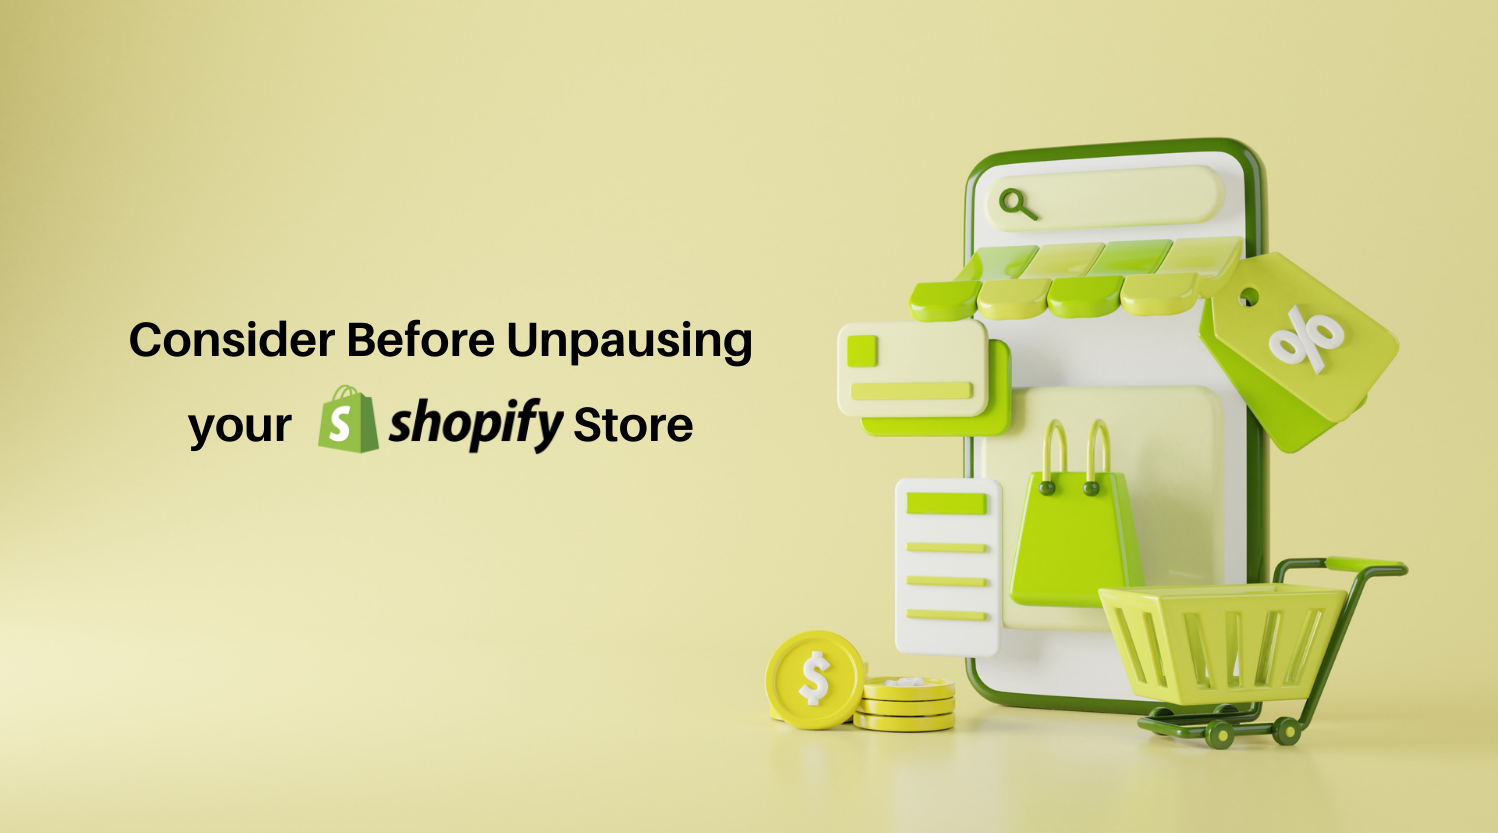 Consider Before Unpausing your Shopify Store